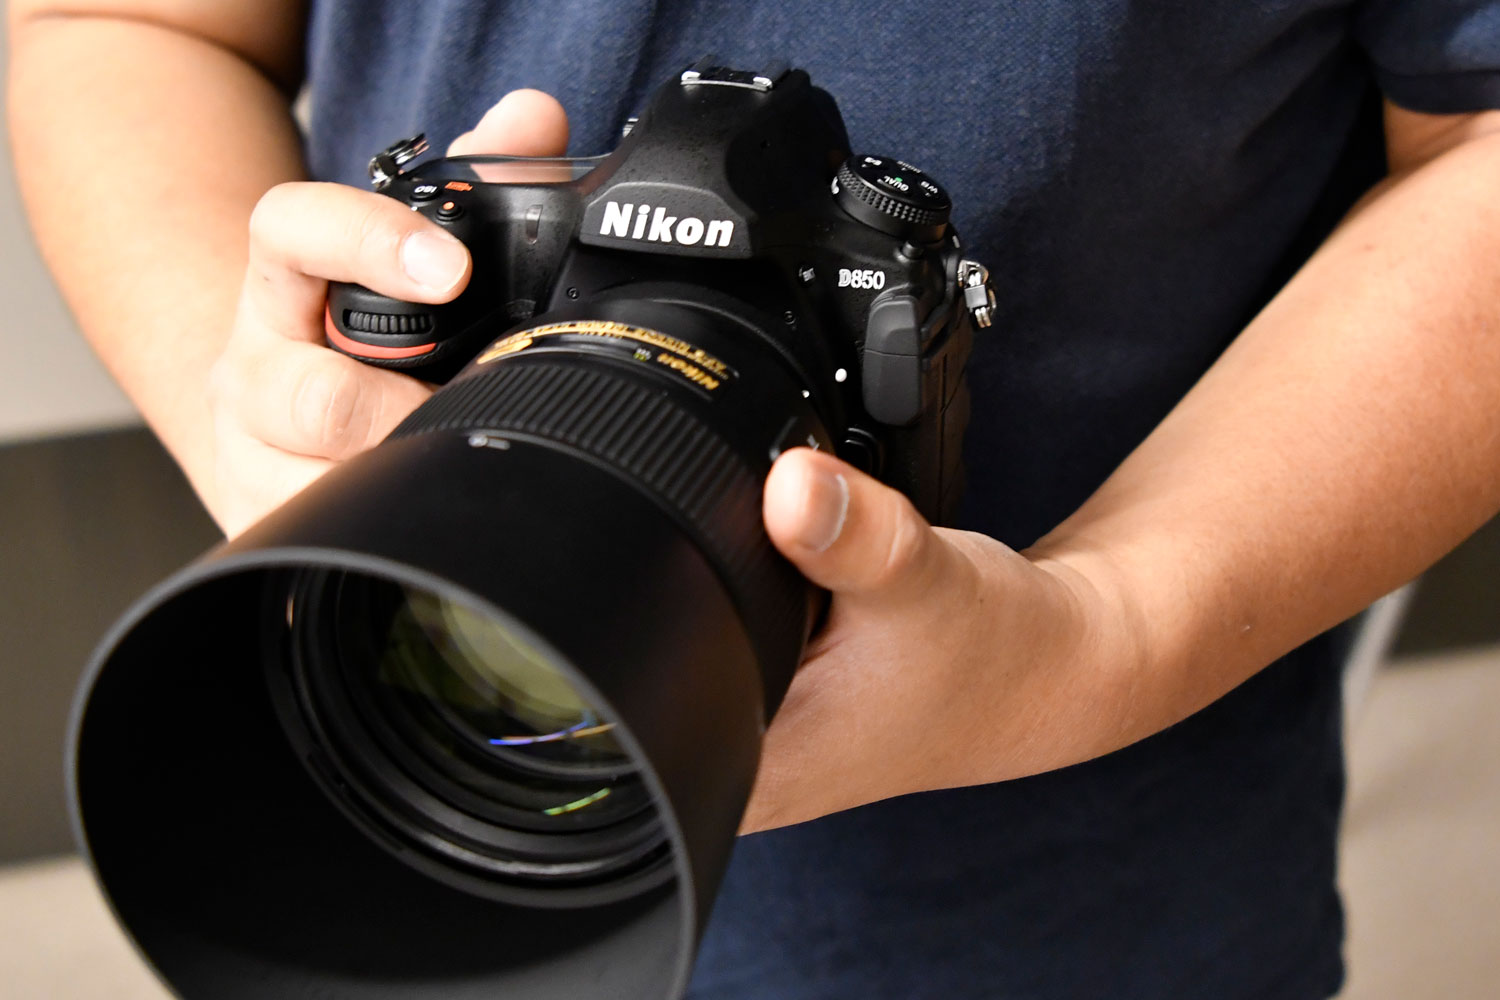 Nikon D850 - hands-on with Nikon's best all-round camera yet